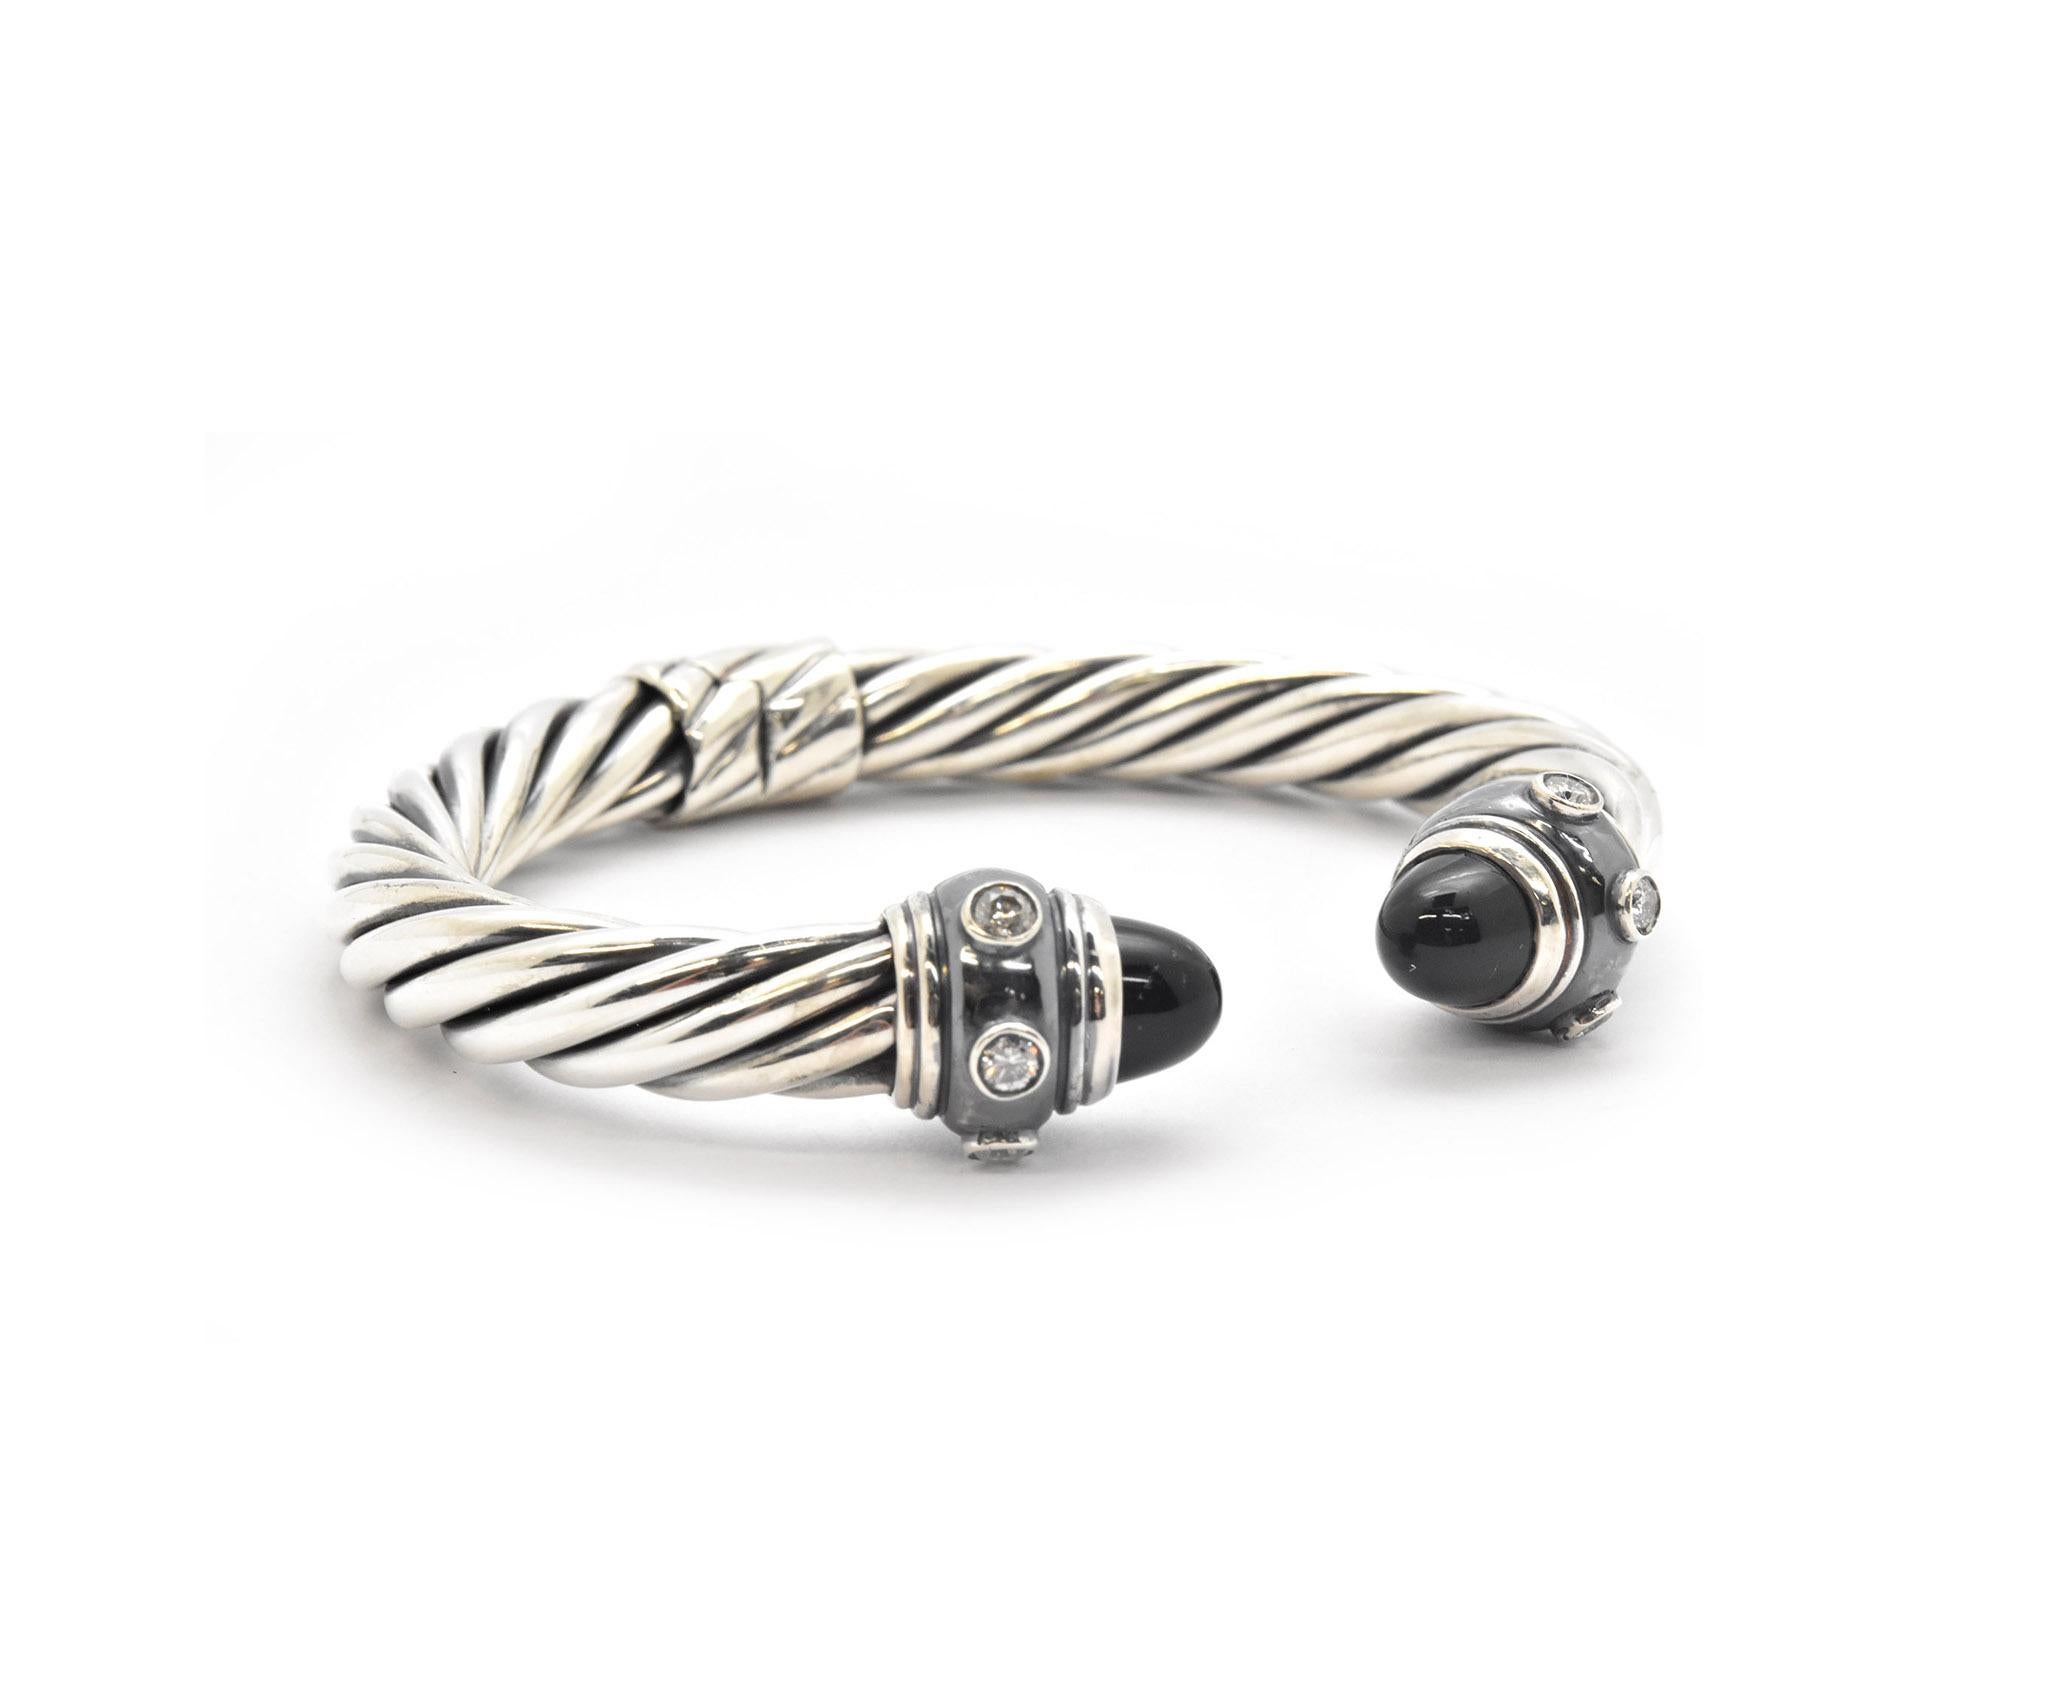 This bracelet is designed by David Yurman in The Waverly Cable Collection. The bangle bracelet is set with 0.50cttw diamonds on each end, and also with black onyx accents at each end of the bangle. This bracelet is designed in sterling silver and